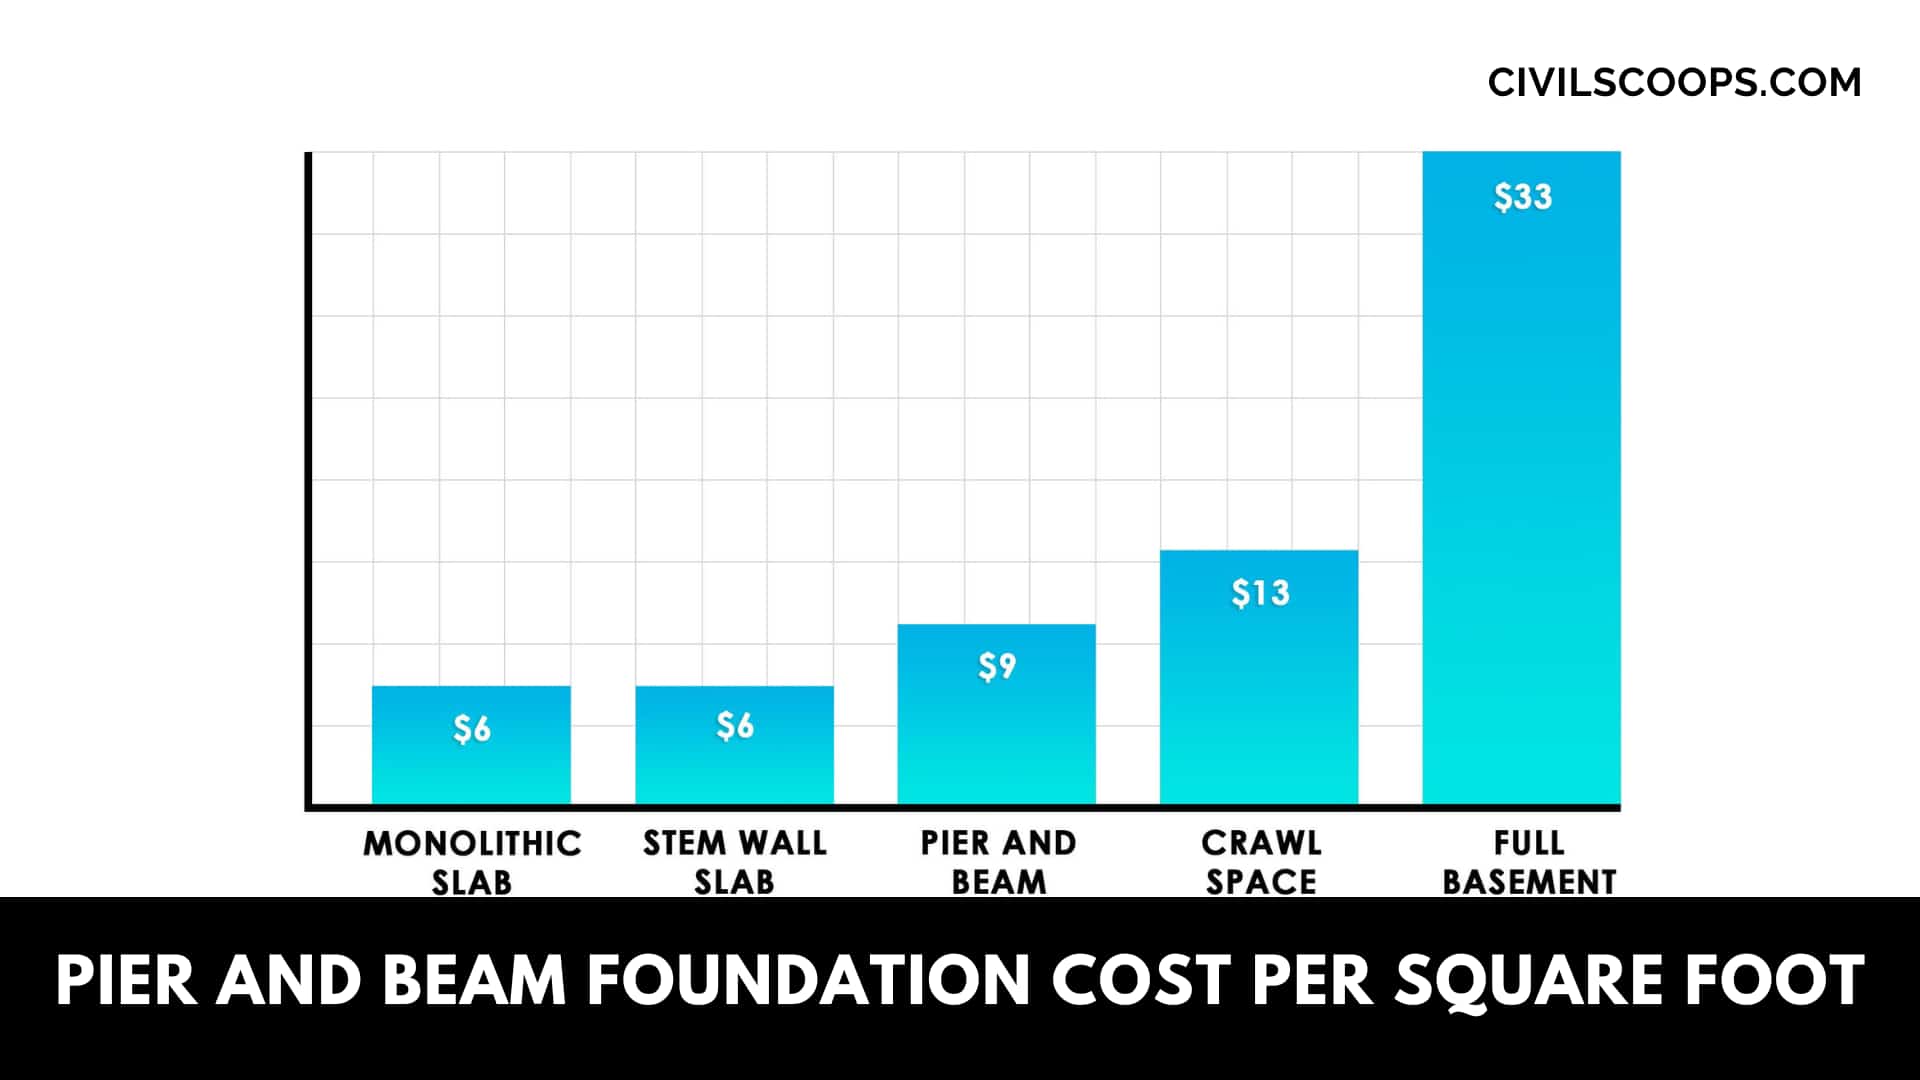 Pier and Beam Foundation Cost Per Square Foot